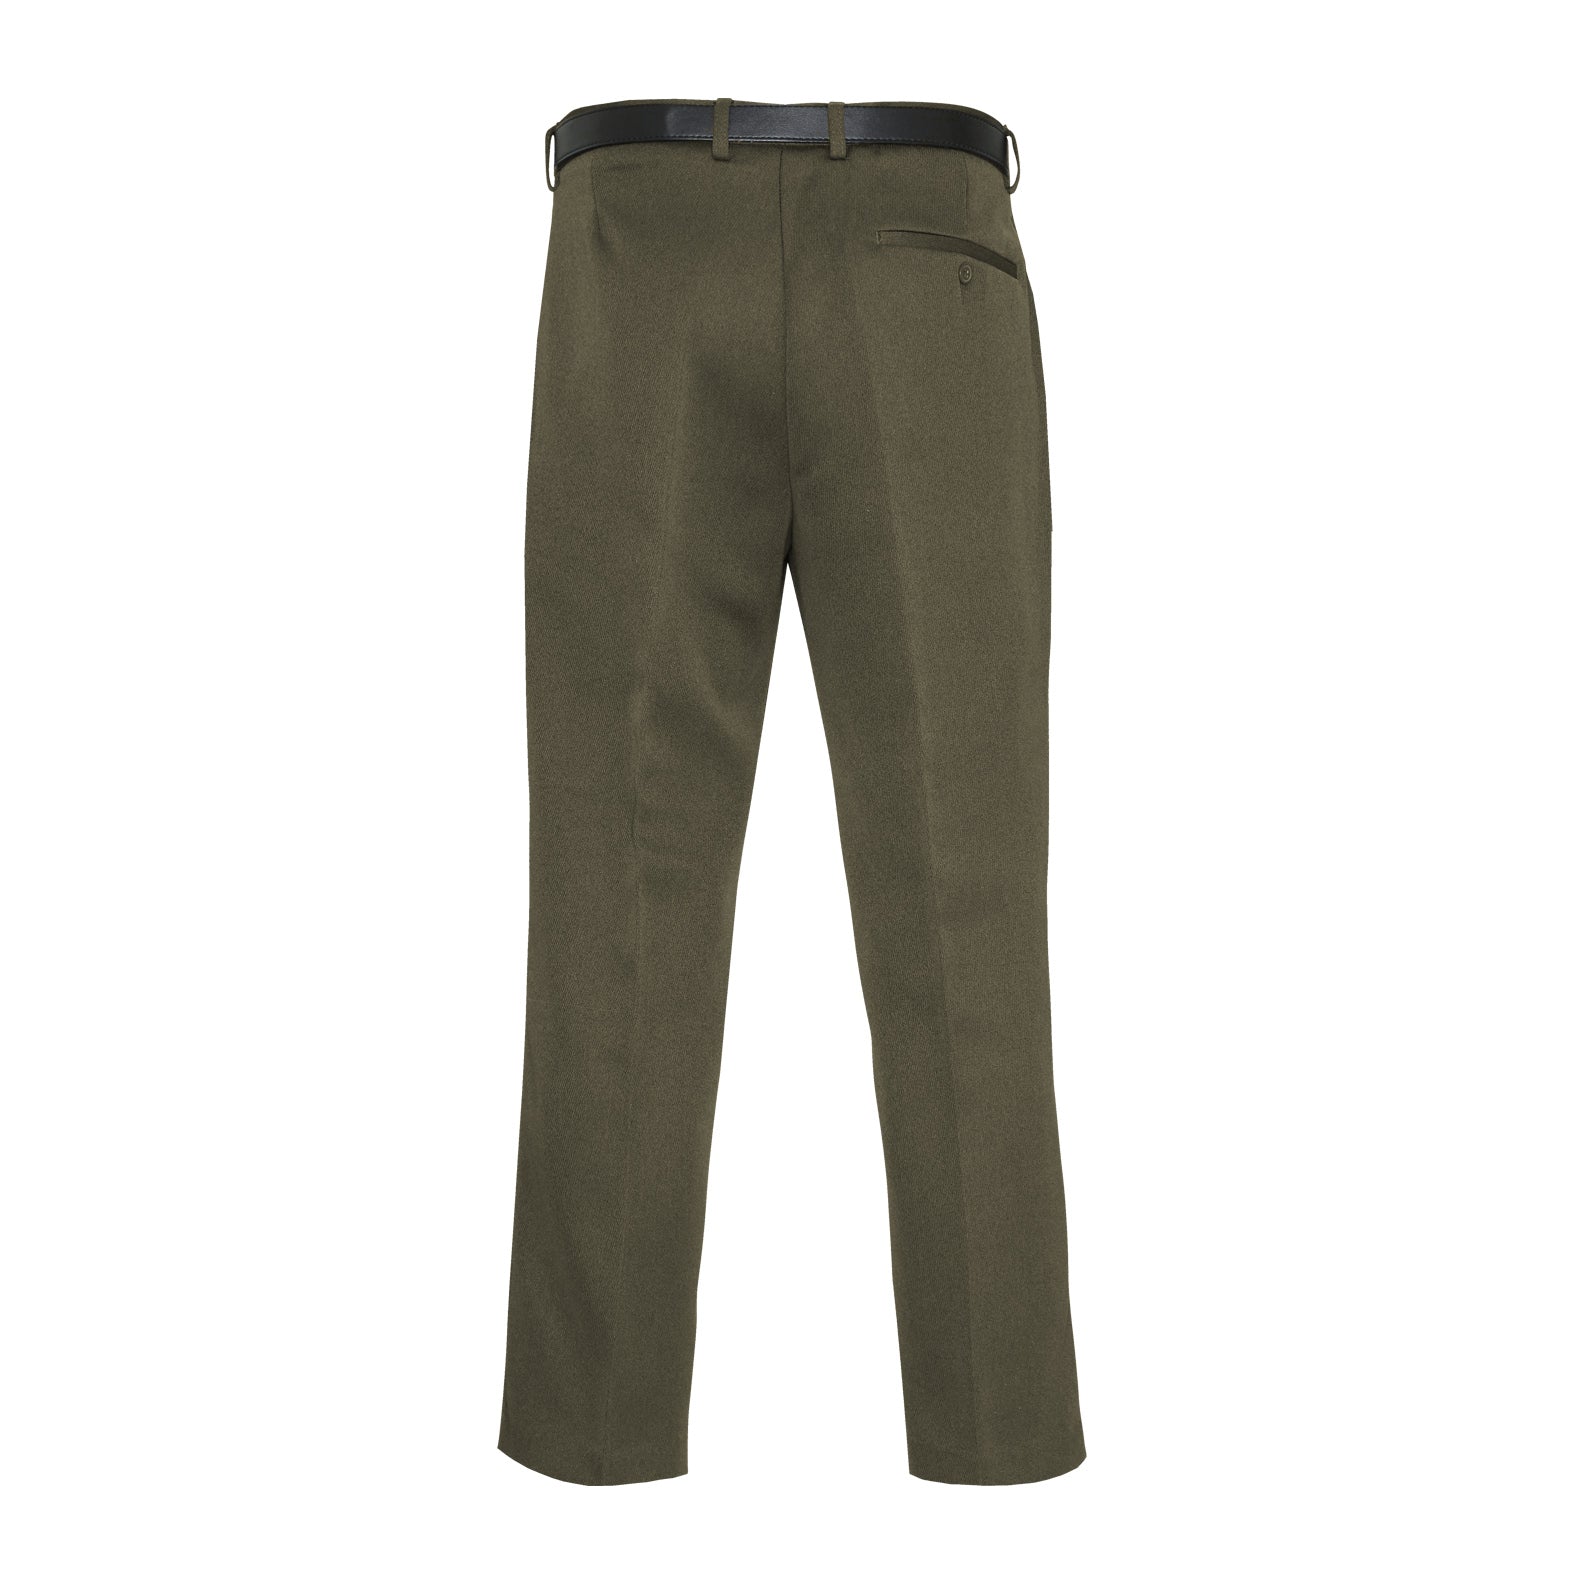 Cavalry Twill Trousers - Navy